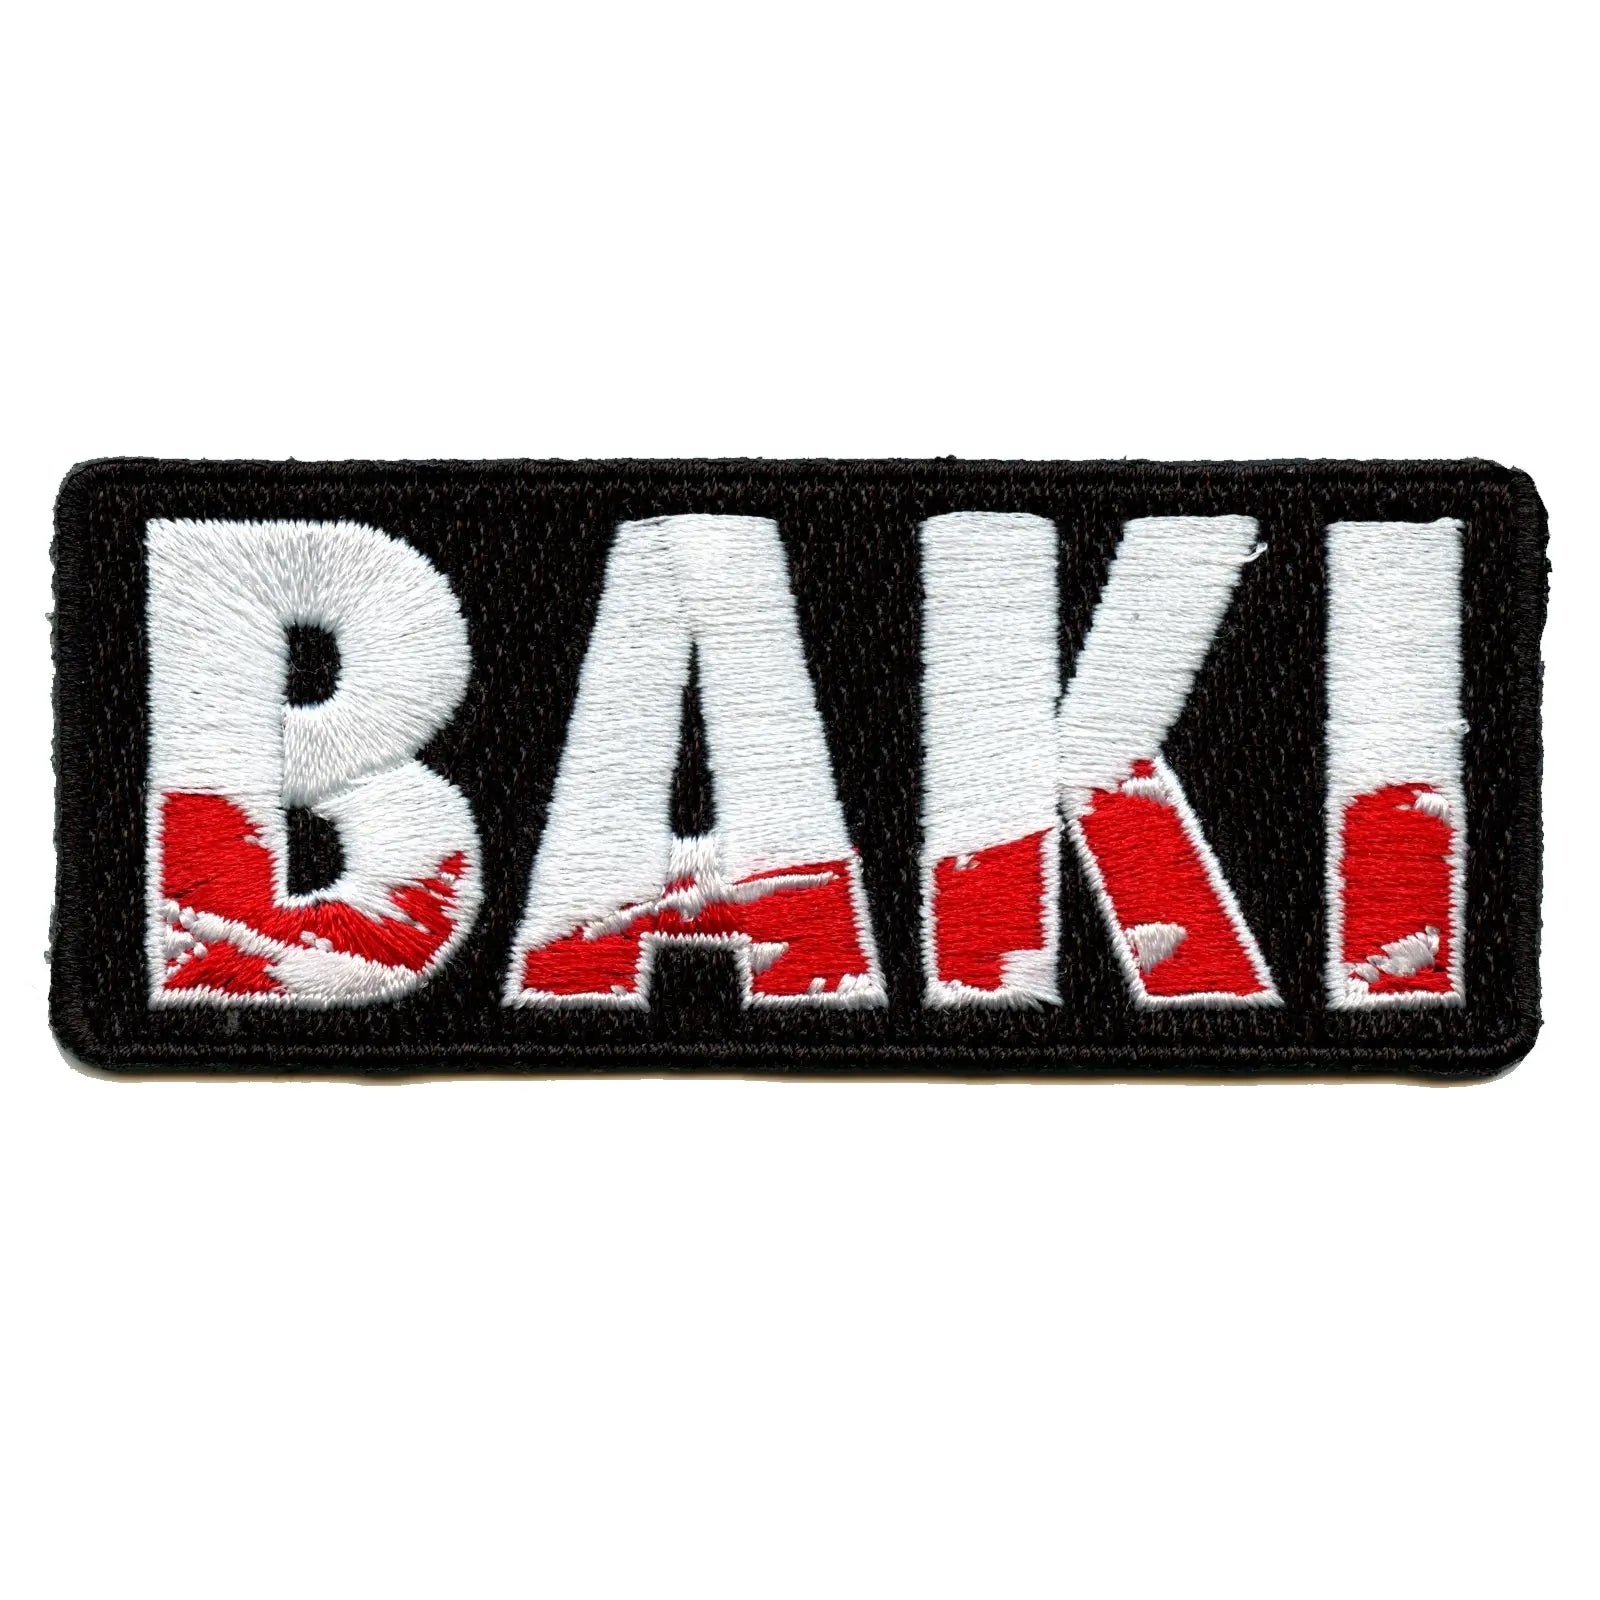 Cartoon Japan Anime Iron On Patches wholesale Stickers Iron On Embroidered  Patch Jacket Handbag Badge Appliques